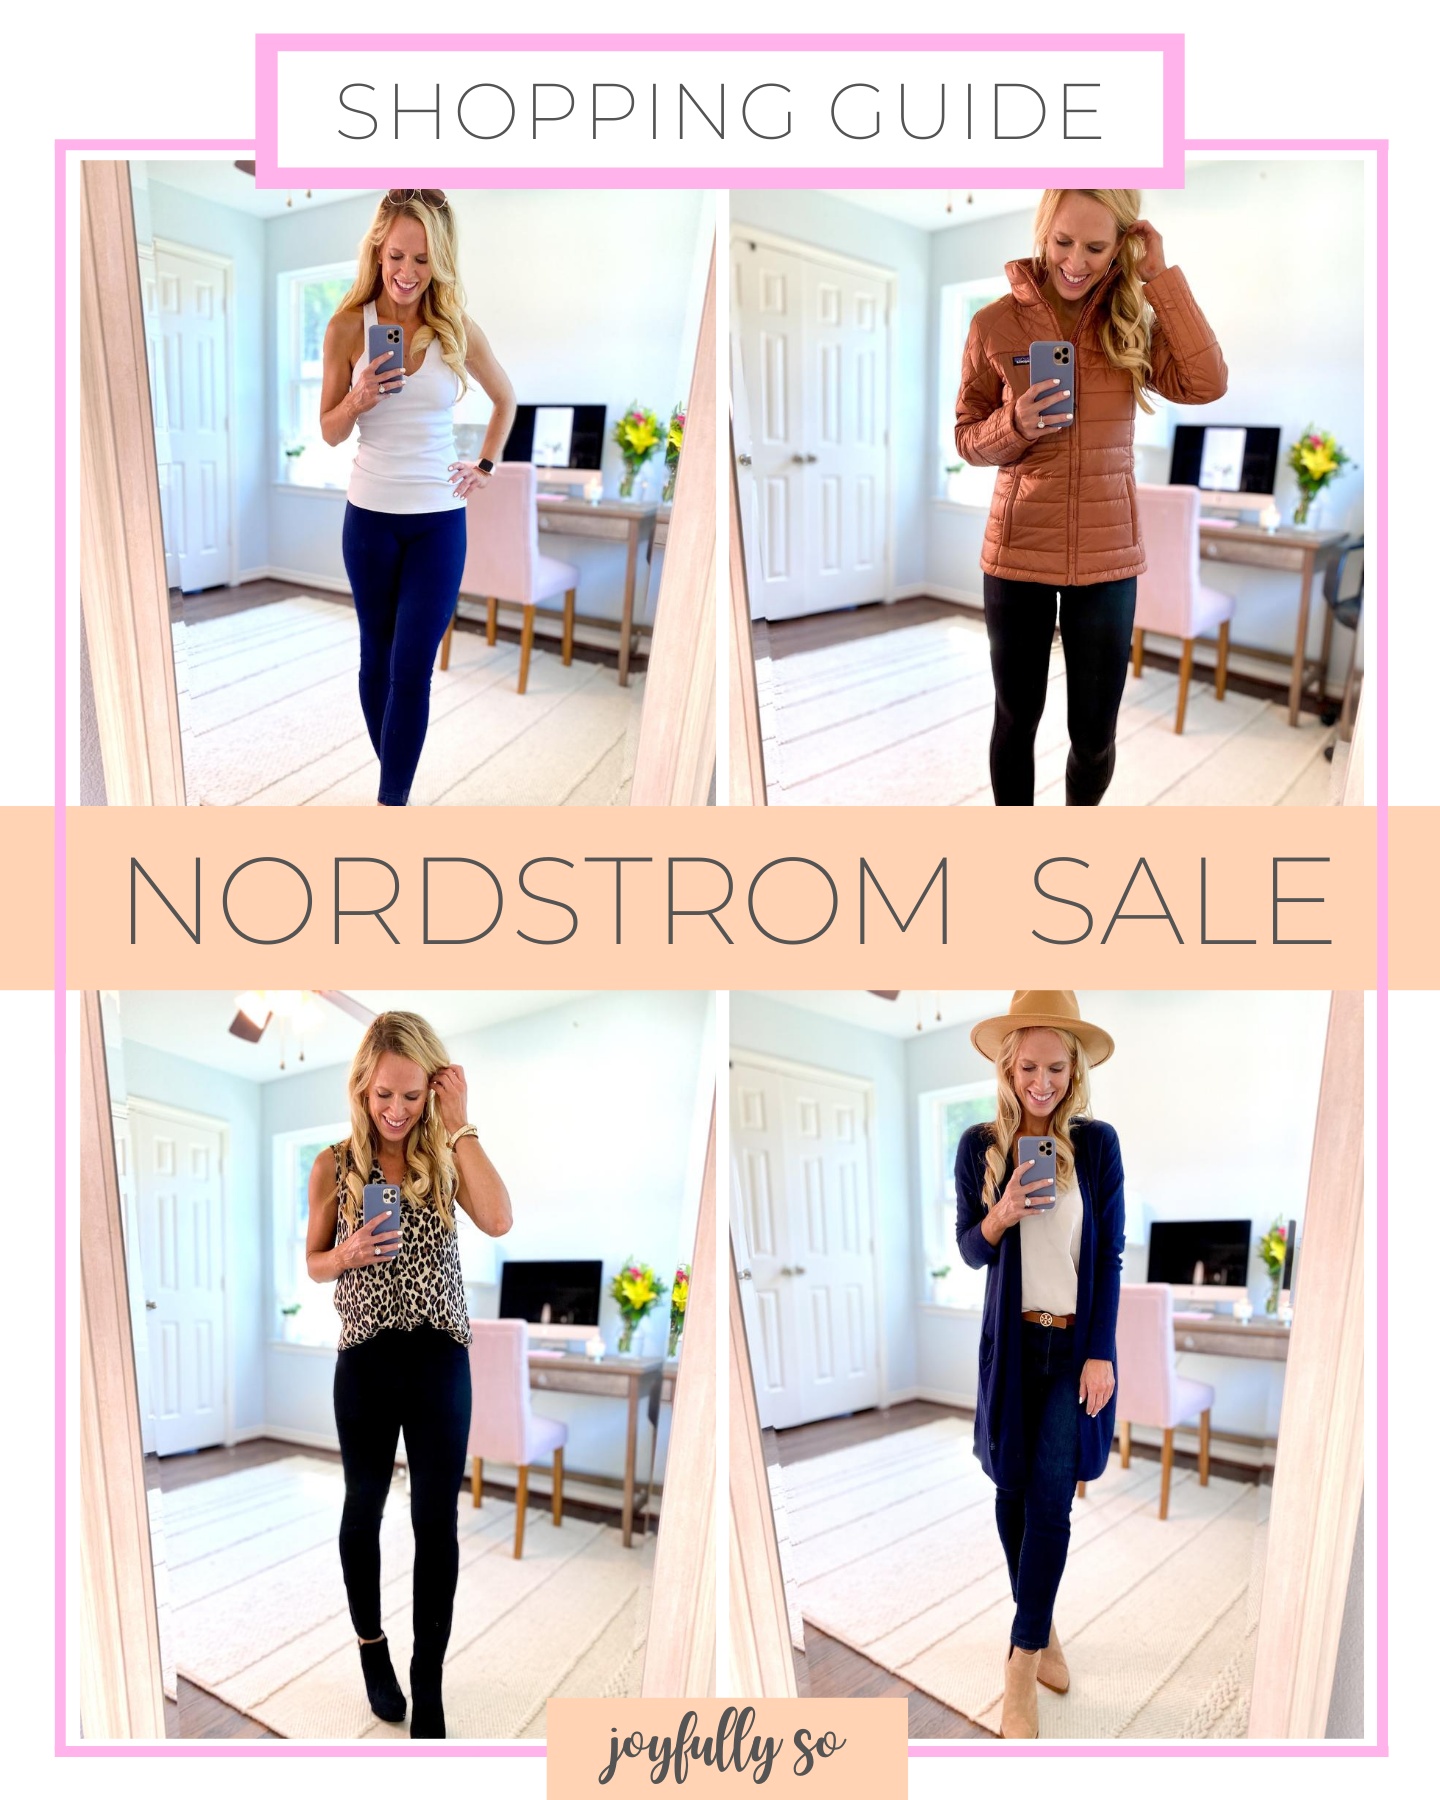 Nordstrom Sale picks, outfits and a giveaway! Let’s get to the Women’s Nordstrom Anniversary Sale 2020 Shopping Guide!